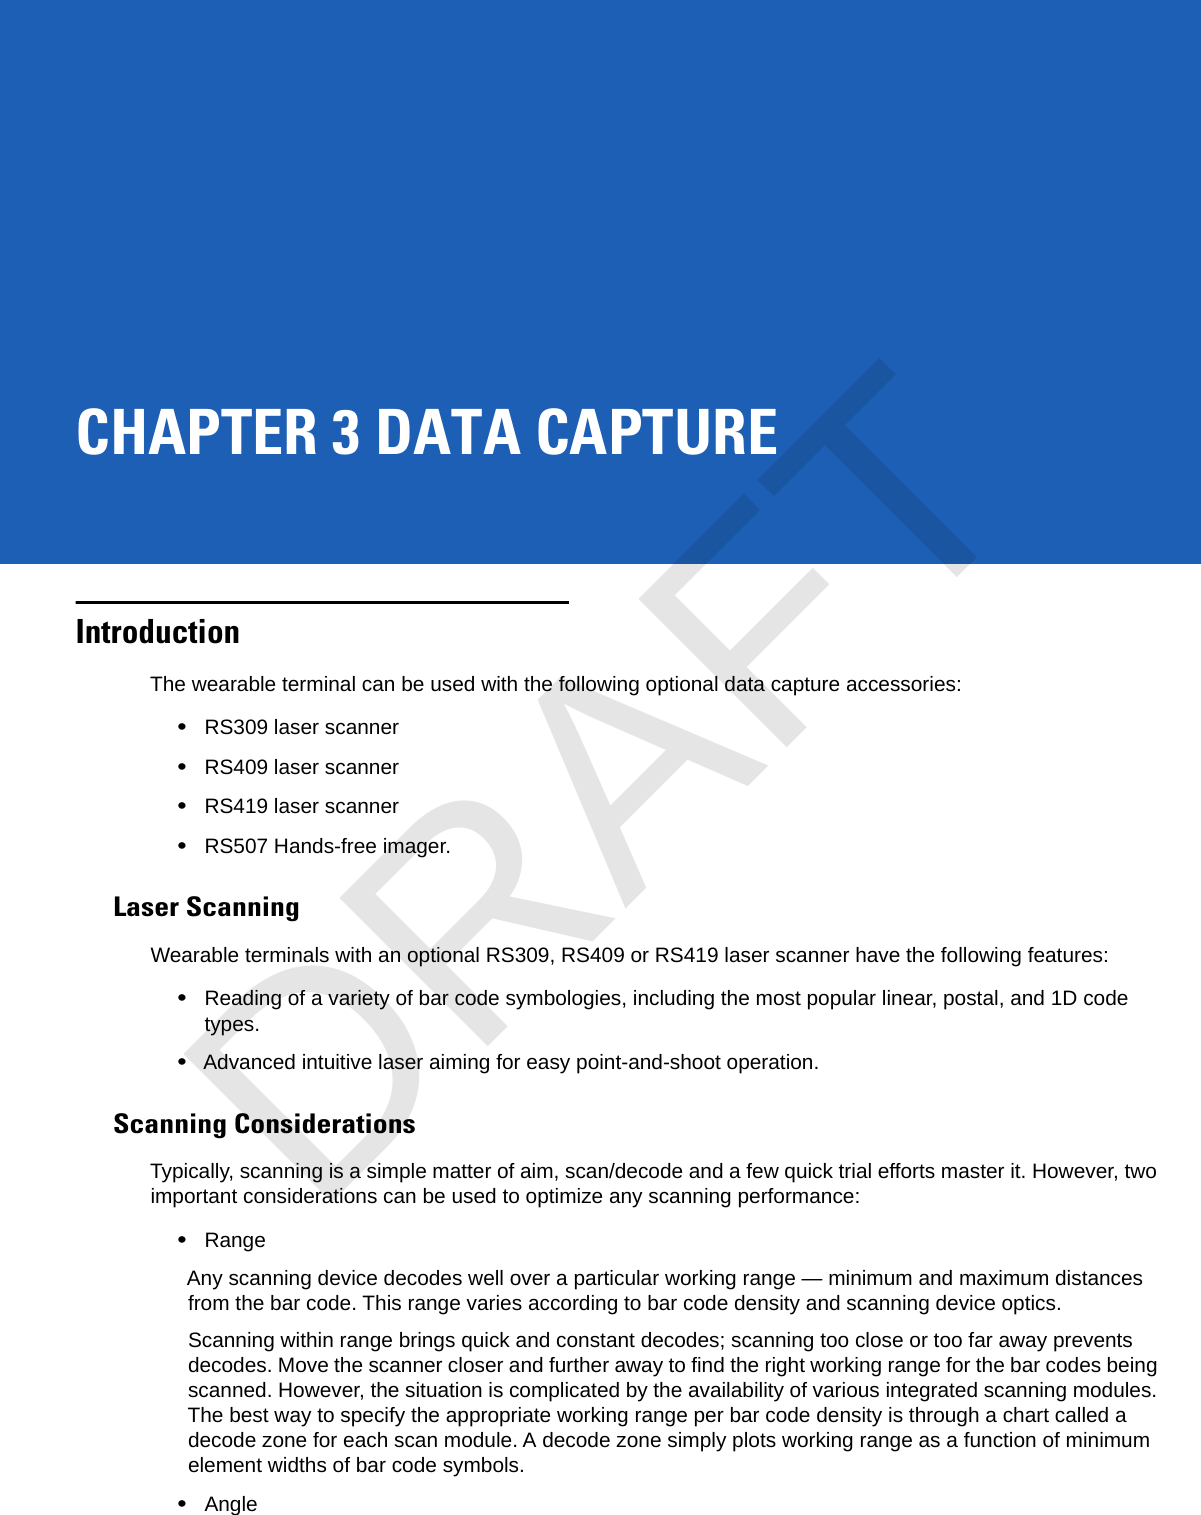 CHAPTER 3 DATA CAPTUREIntroductionThe wearable terminal can be used with the following optional data capture accessories:•RS309 laser scanner•RS409 laser scanner•RS419 laser scanner•RS507 Hands-free imager.Laser ScanningWearable terminals with an optional RS309, RS409 or RS419 laser scanner have the following features:•Reading of a variety of bar code symbologies, including the most popular linear, postal, and 1D code types.•Advanced intuitive laser aiming for easy point-and-shoot operation.Scanning ConsiderationsTypically, scanning is a simple matter of aim, scan/decode and a few quick trial efforts master it. However, two important considerations can be used to optimize any scanning performance:•RangeAny scanning device decodes well over a particular working range — minimum and maximum distances from the bar code. This range varies according to bar code density and scanning device optics.Scanning within range brings quick and constant decodes; scanning too close or too far away prevents decodes. Move the scanner closer and further away to find the right working range for the bar codes being scanned. However, the situation is complicated by the availability of various integrated scanning modules. The best way to specify the appropriate working range per bar code density is through a chart called a decode zone for each scan module. A decode zone simply plots working range as a function of minimum element widths of bar code symbols.•AngleDRAFT